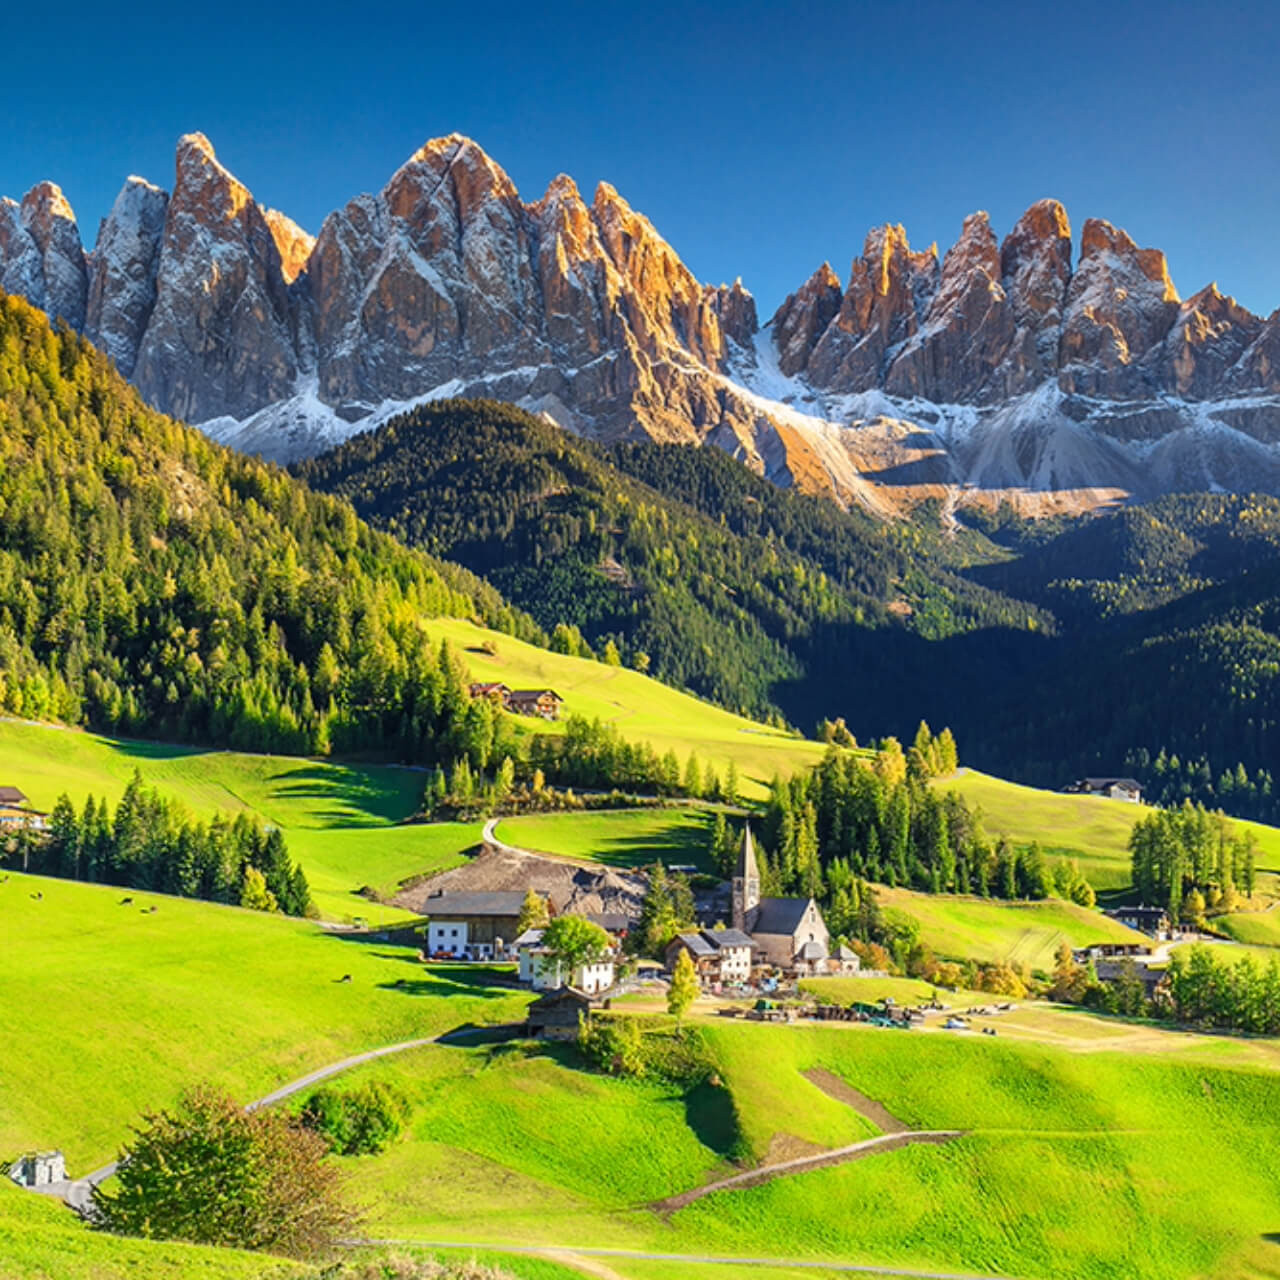 Breathtaking view of the Dolomite mountains with snow-capped peaks towering over lush green Alpine meadows and a small village with traditional houses in the valley.